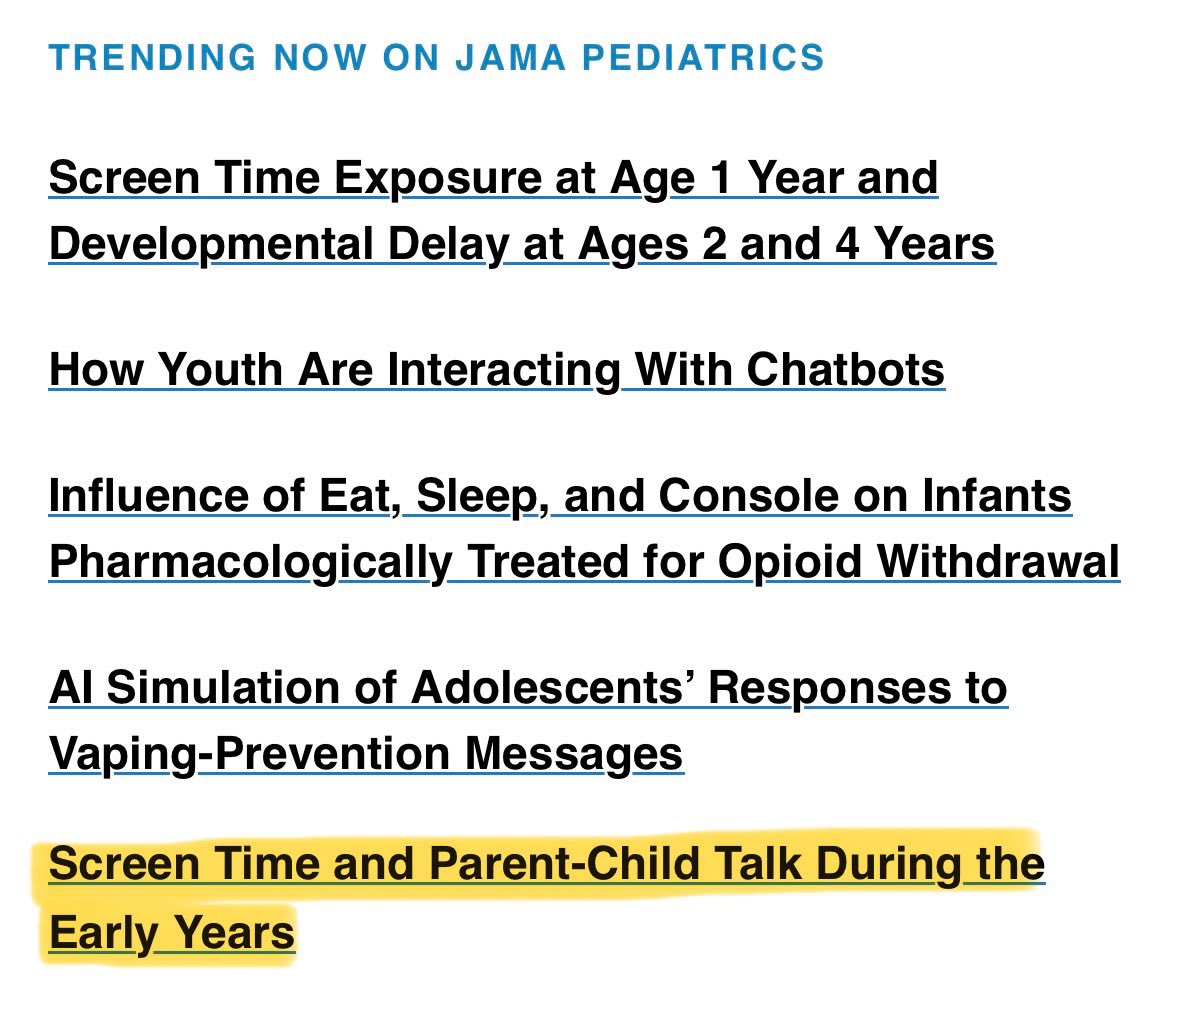 Two months since our @JAMAPediatrics paper was published so very cool to see it still trending & with over 37k views 😱 Thanks everyone who has shared it with their networks. I’m very proud of this work & the impact it’s having. #screentime #earlylanguage jamanetwork.com/journals/jamap…